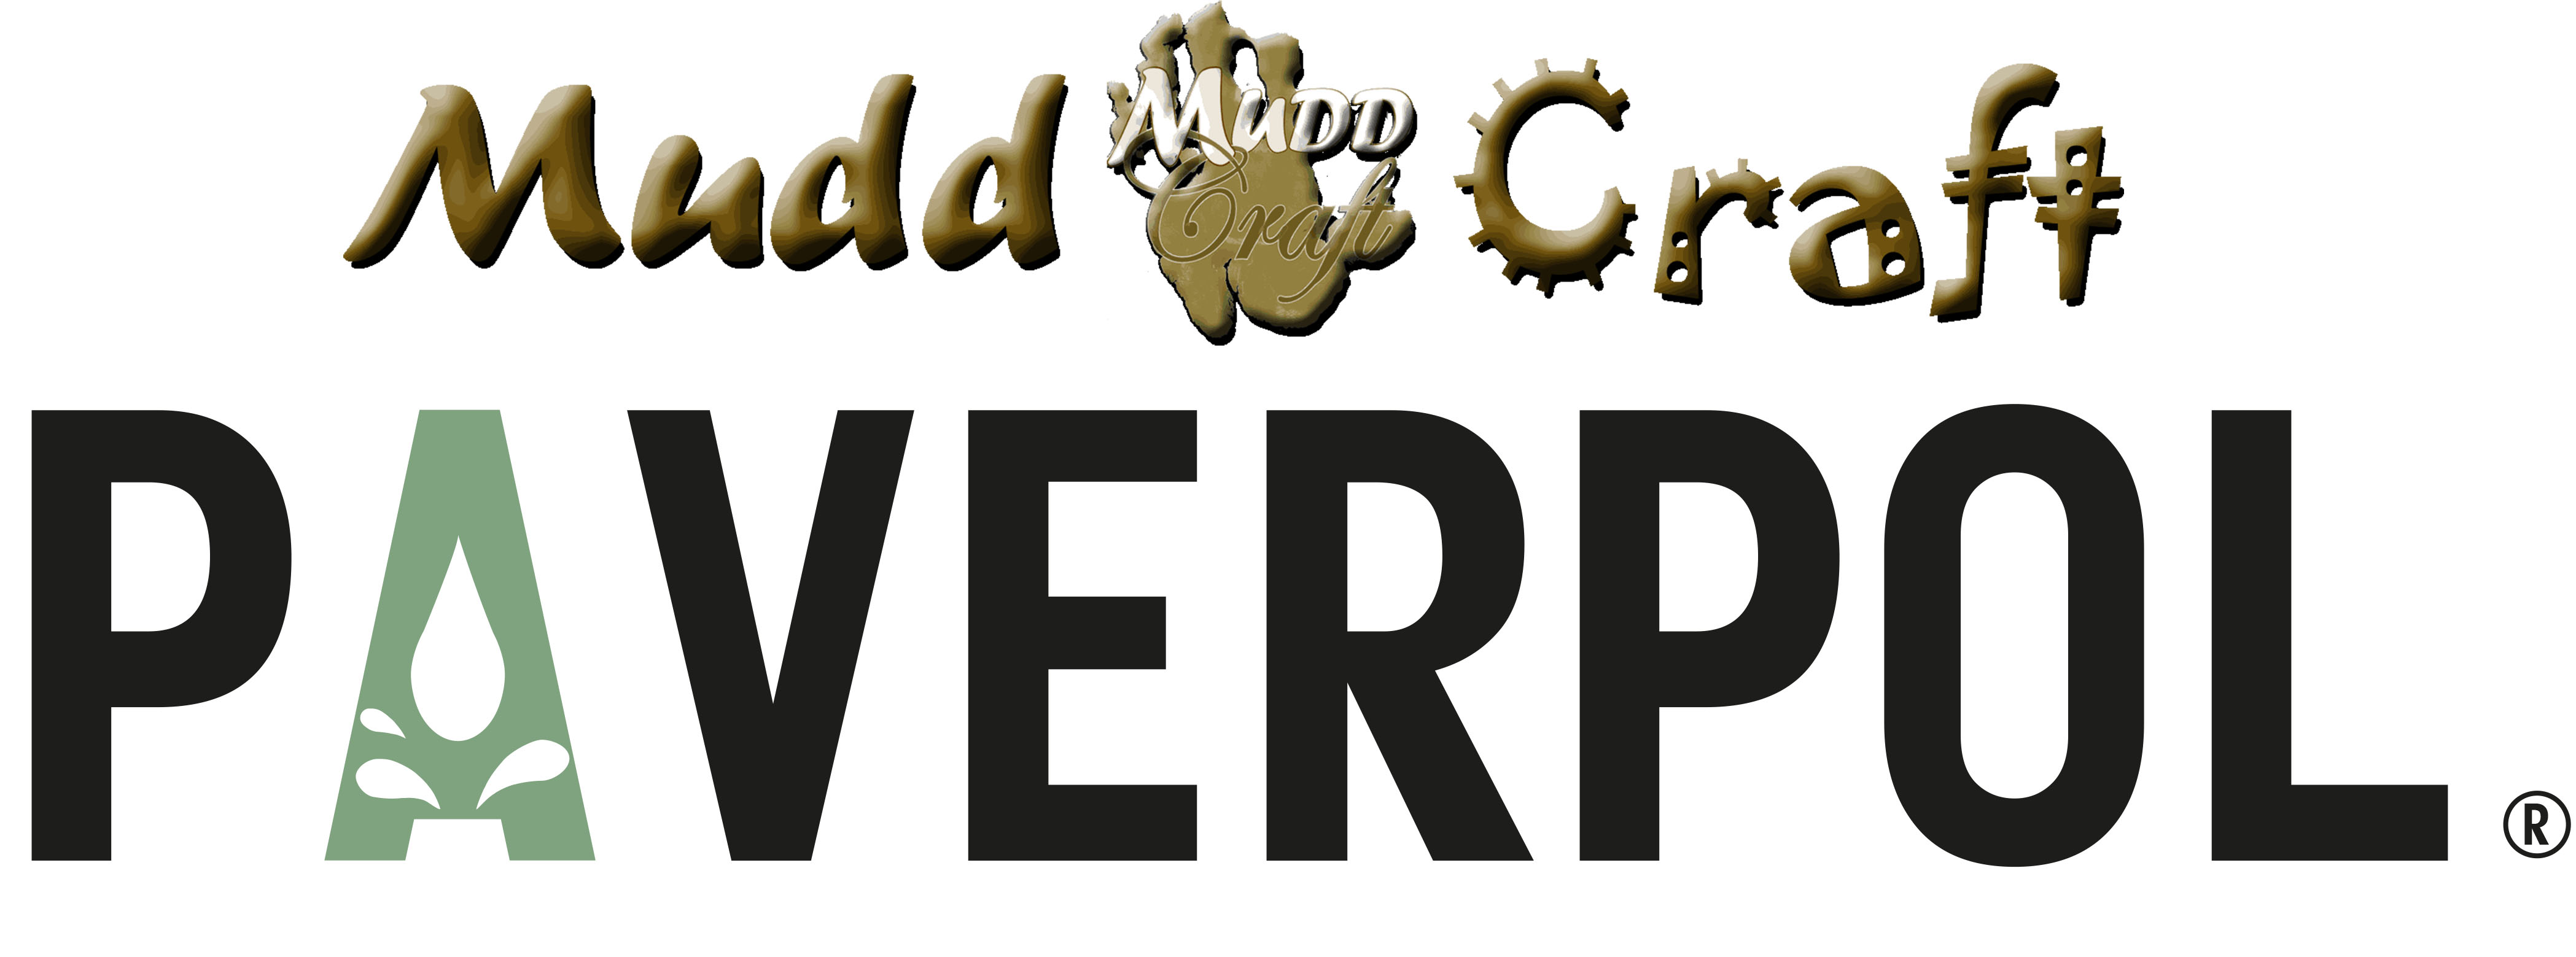 Mudd Craft - Paverpol in South Africa